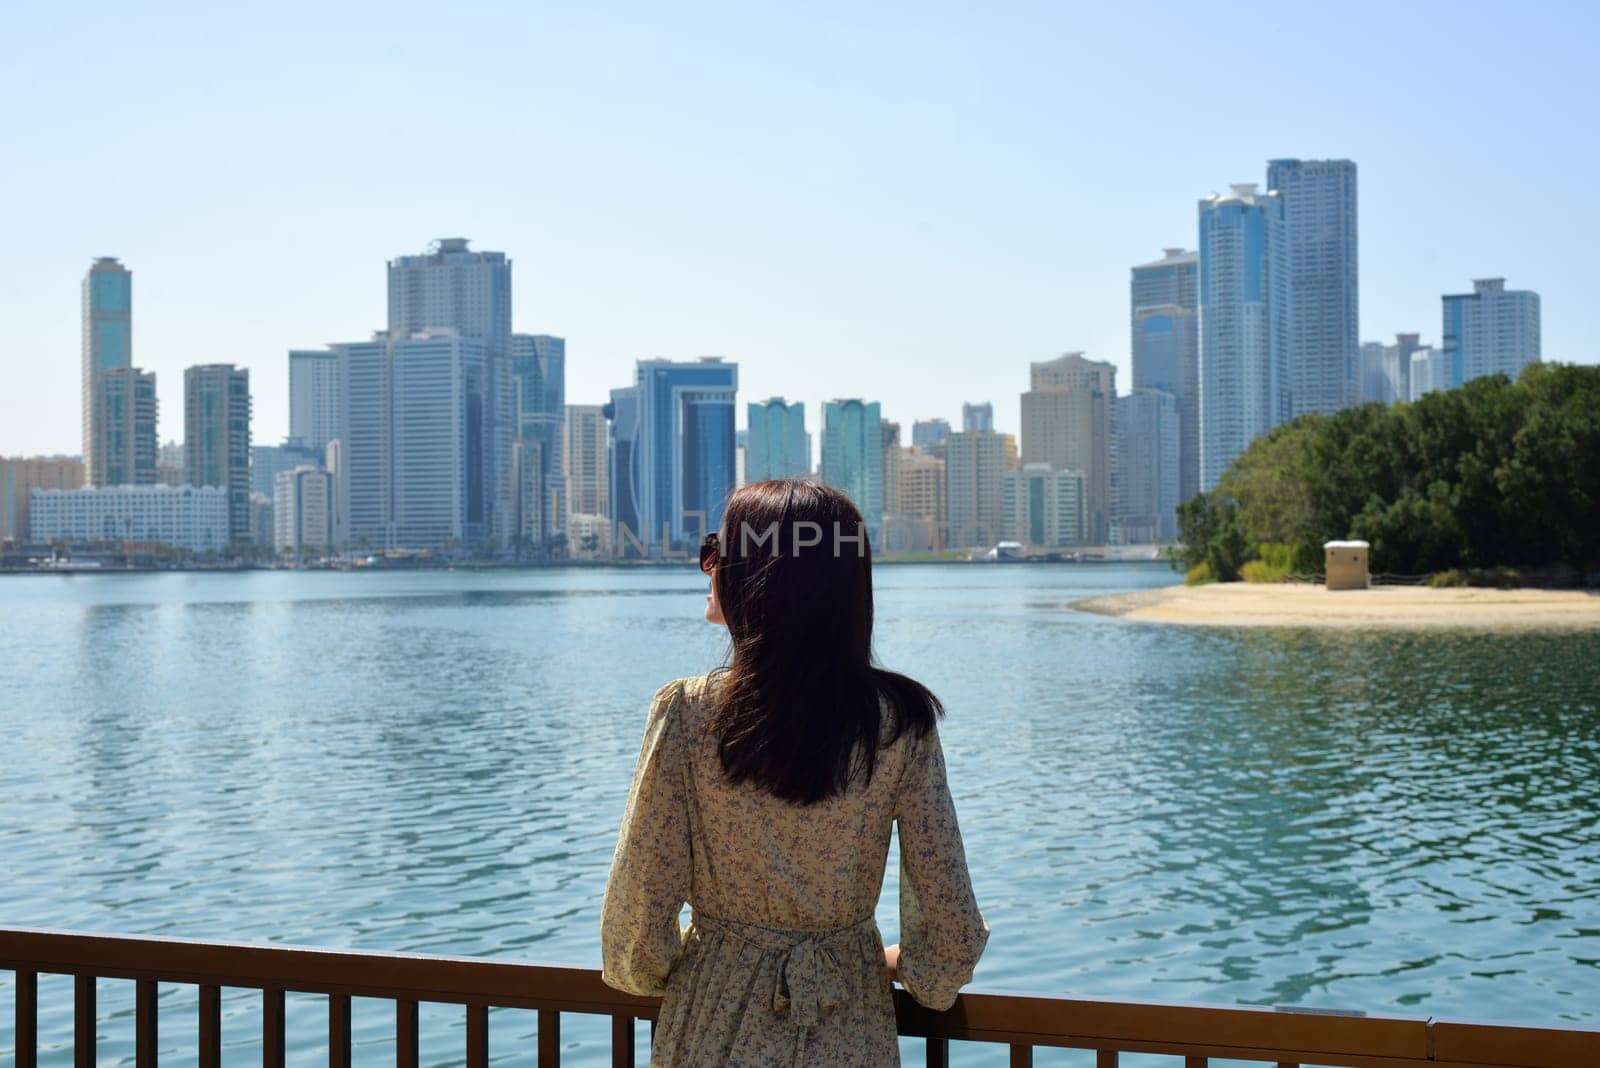 Cityscape of Sharjah UAE. A young woman in a long dress enjoys the view of skyscrapers and relaxing. by Ekaterina34